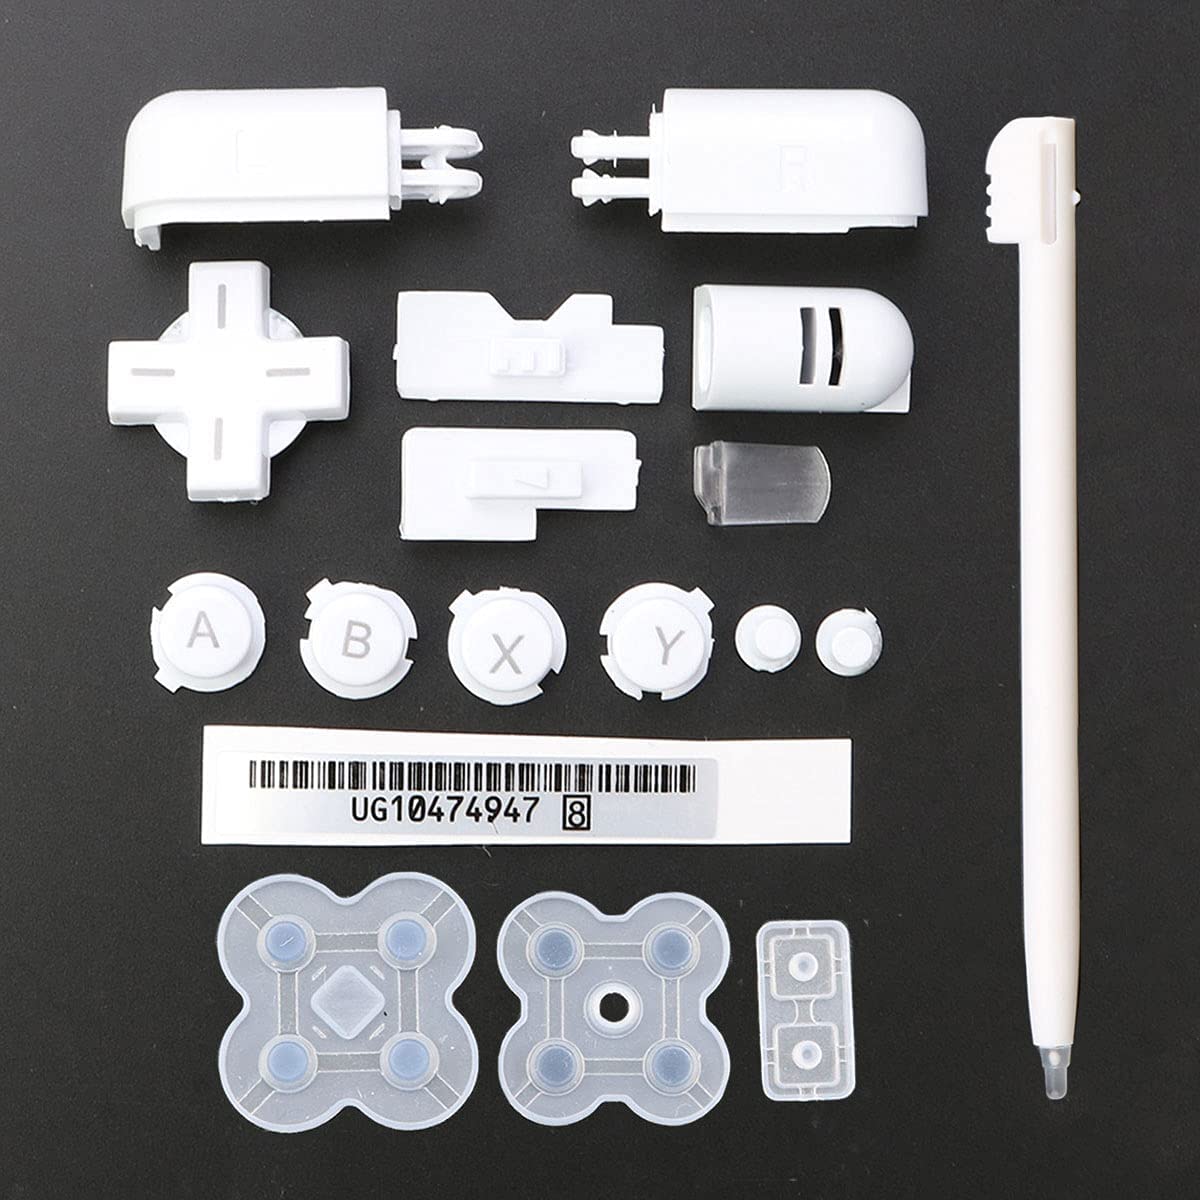 Replacement ABXY L R D Pad Cross Button Full Button Set & Sticker & Conductive Button Pad & Stylus Touch Pen for DS Lite NDSL Console White